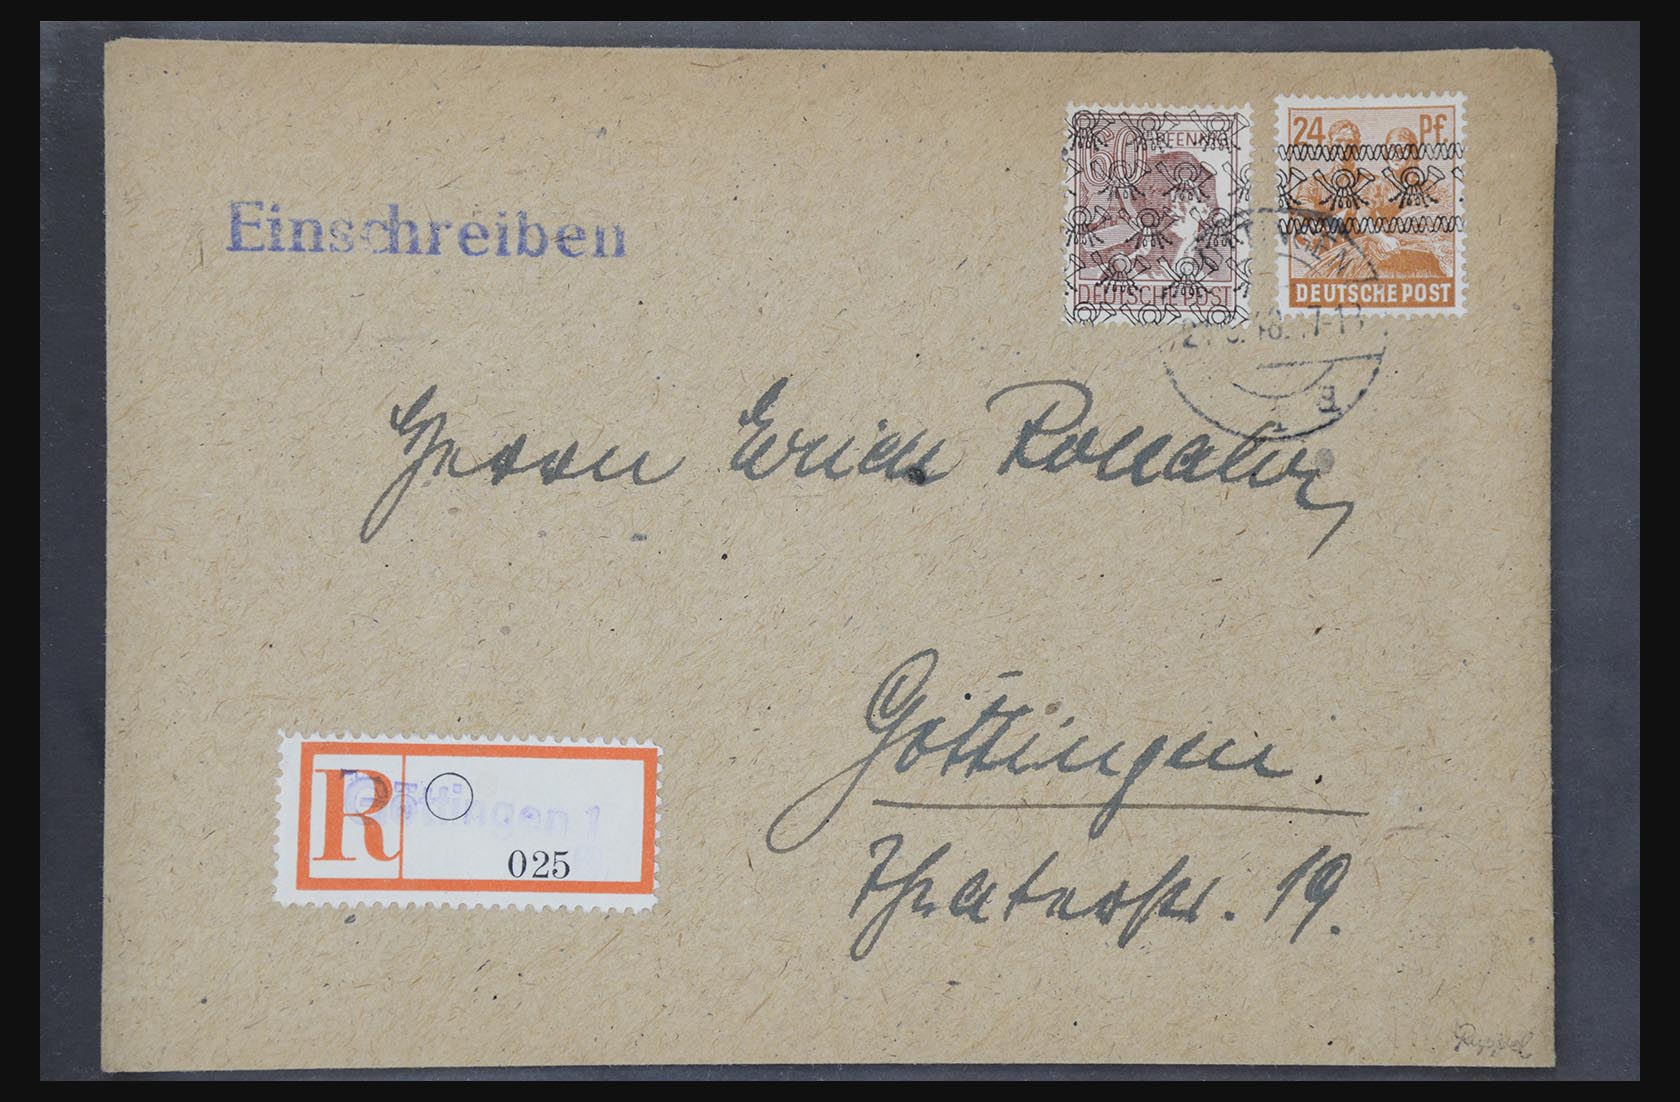 31581 009 - 31581 Germany covers and FDC's 1945-1981.